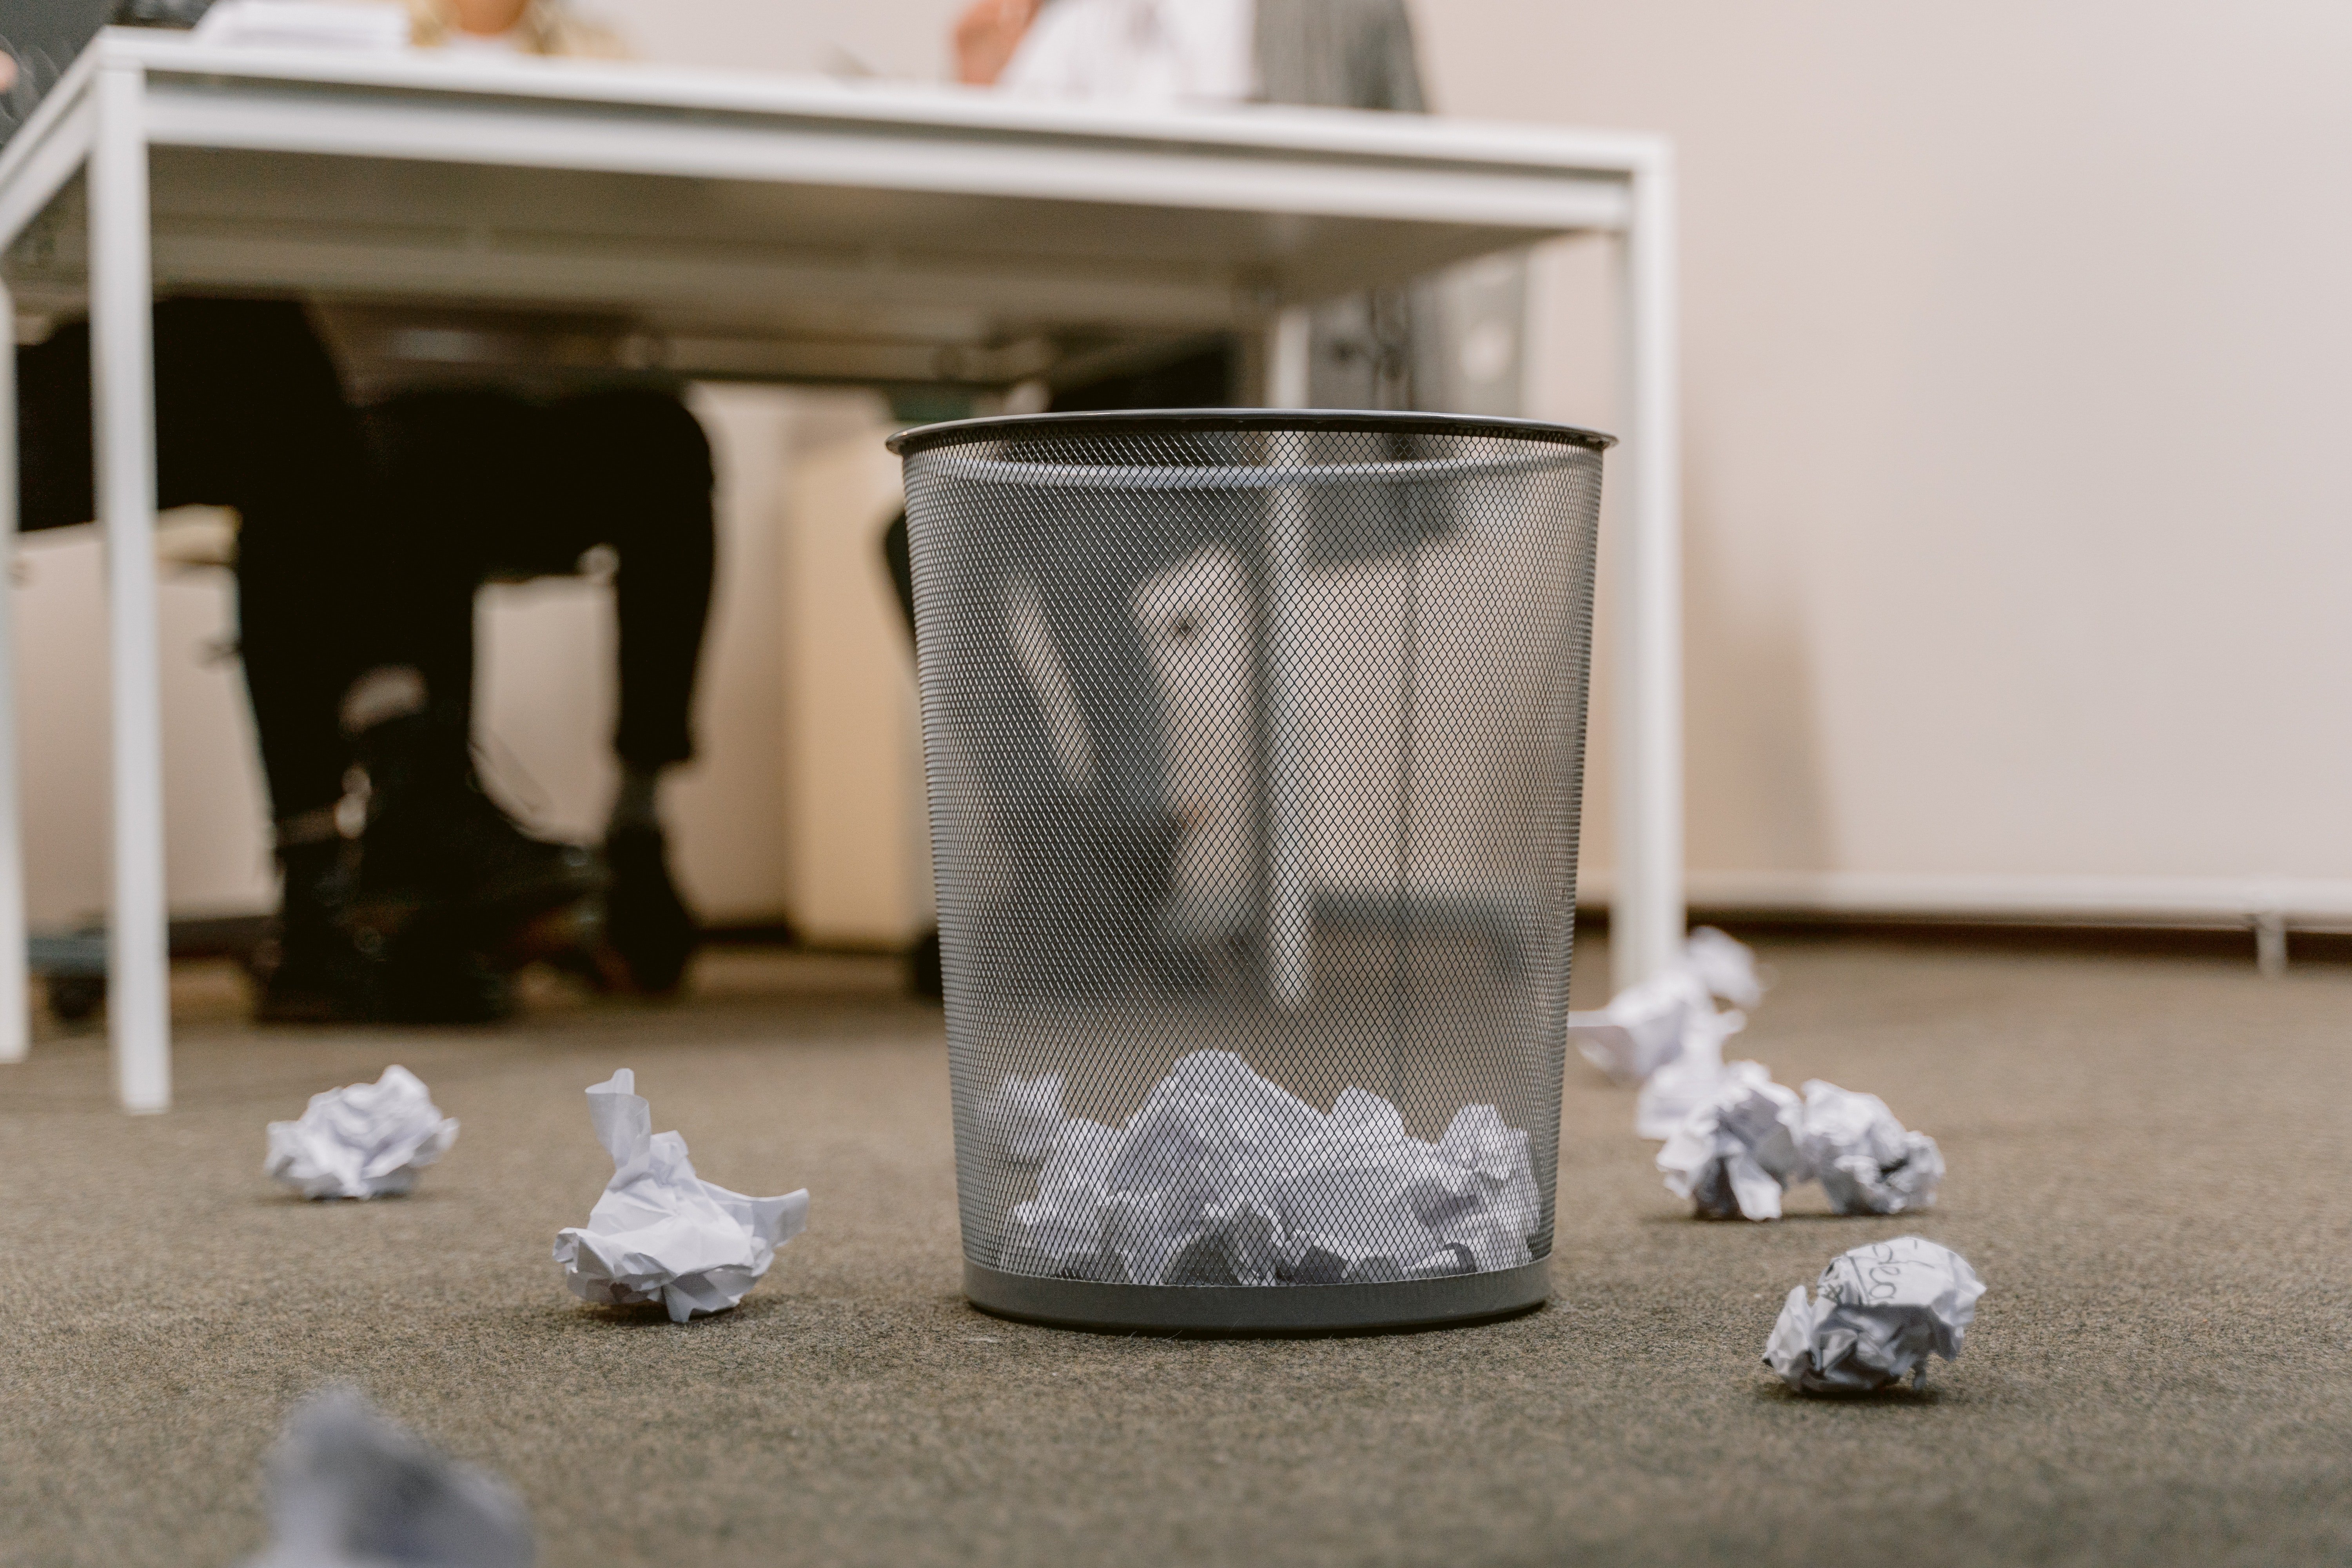 A guy thought Rita was answering back & he kicked the trash bin she held. | Source: Pexels